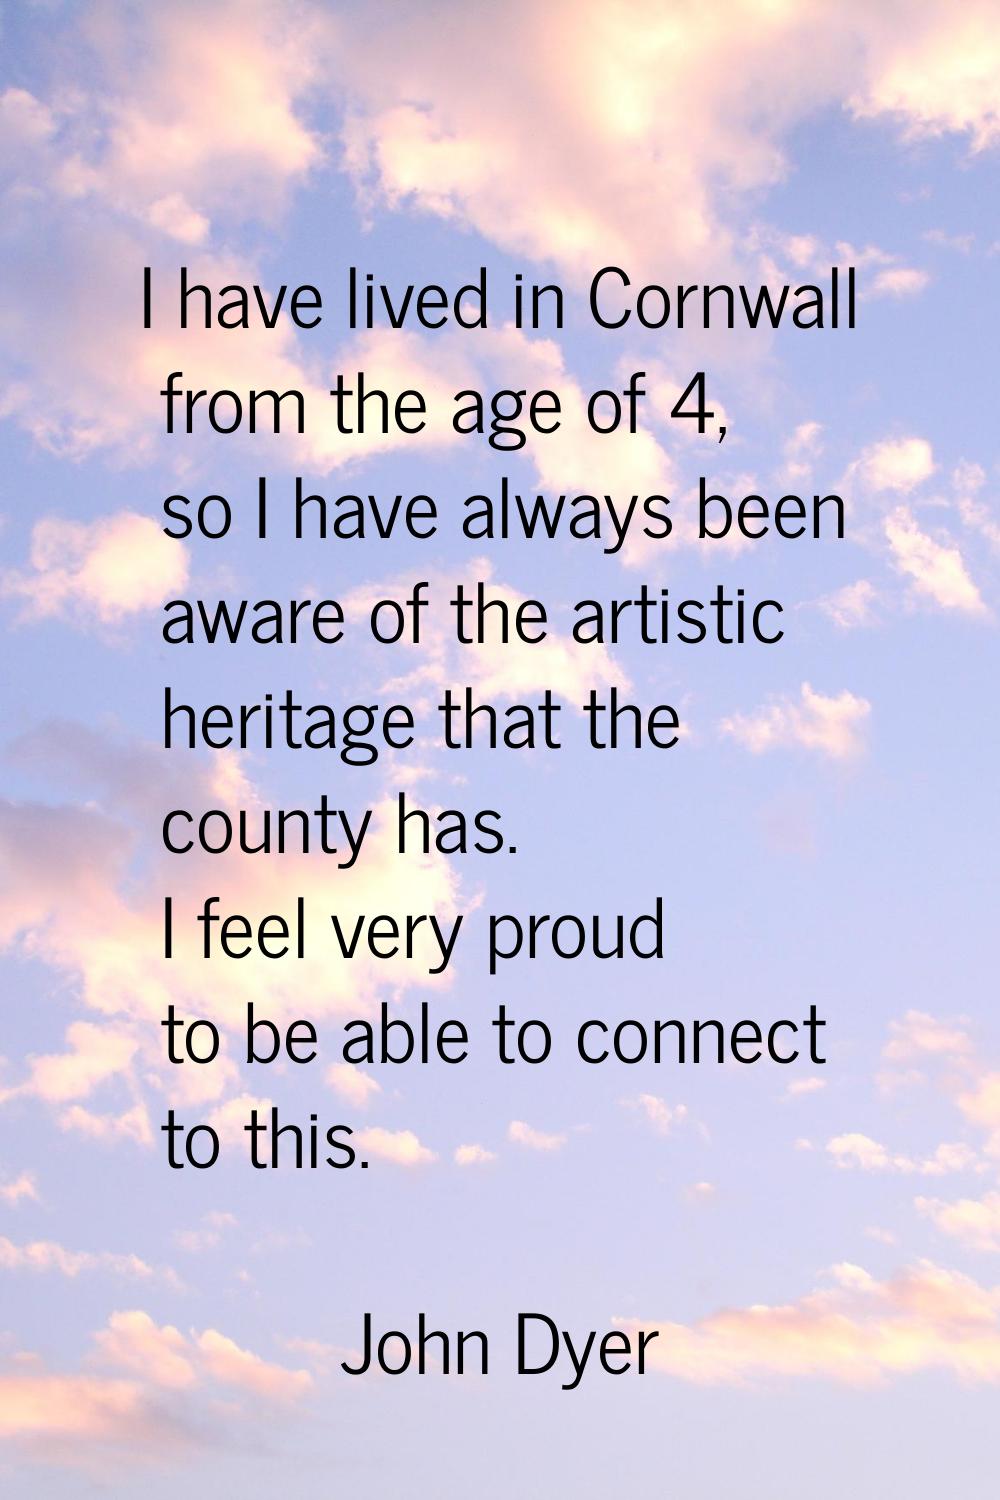 I have lived in Cornwall from the age of 4, so I have always been aware of the artistic heritage th